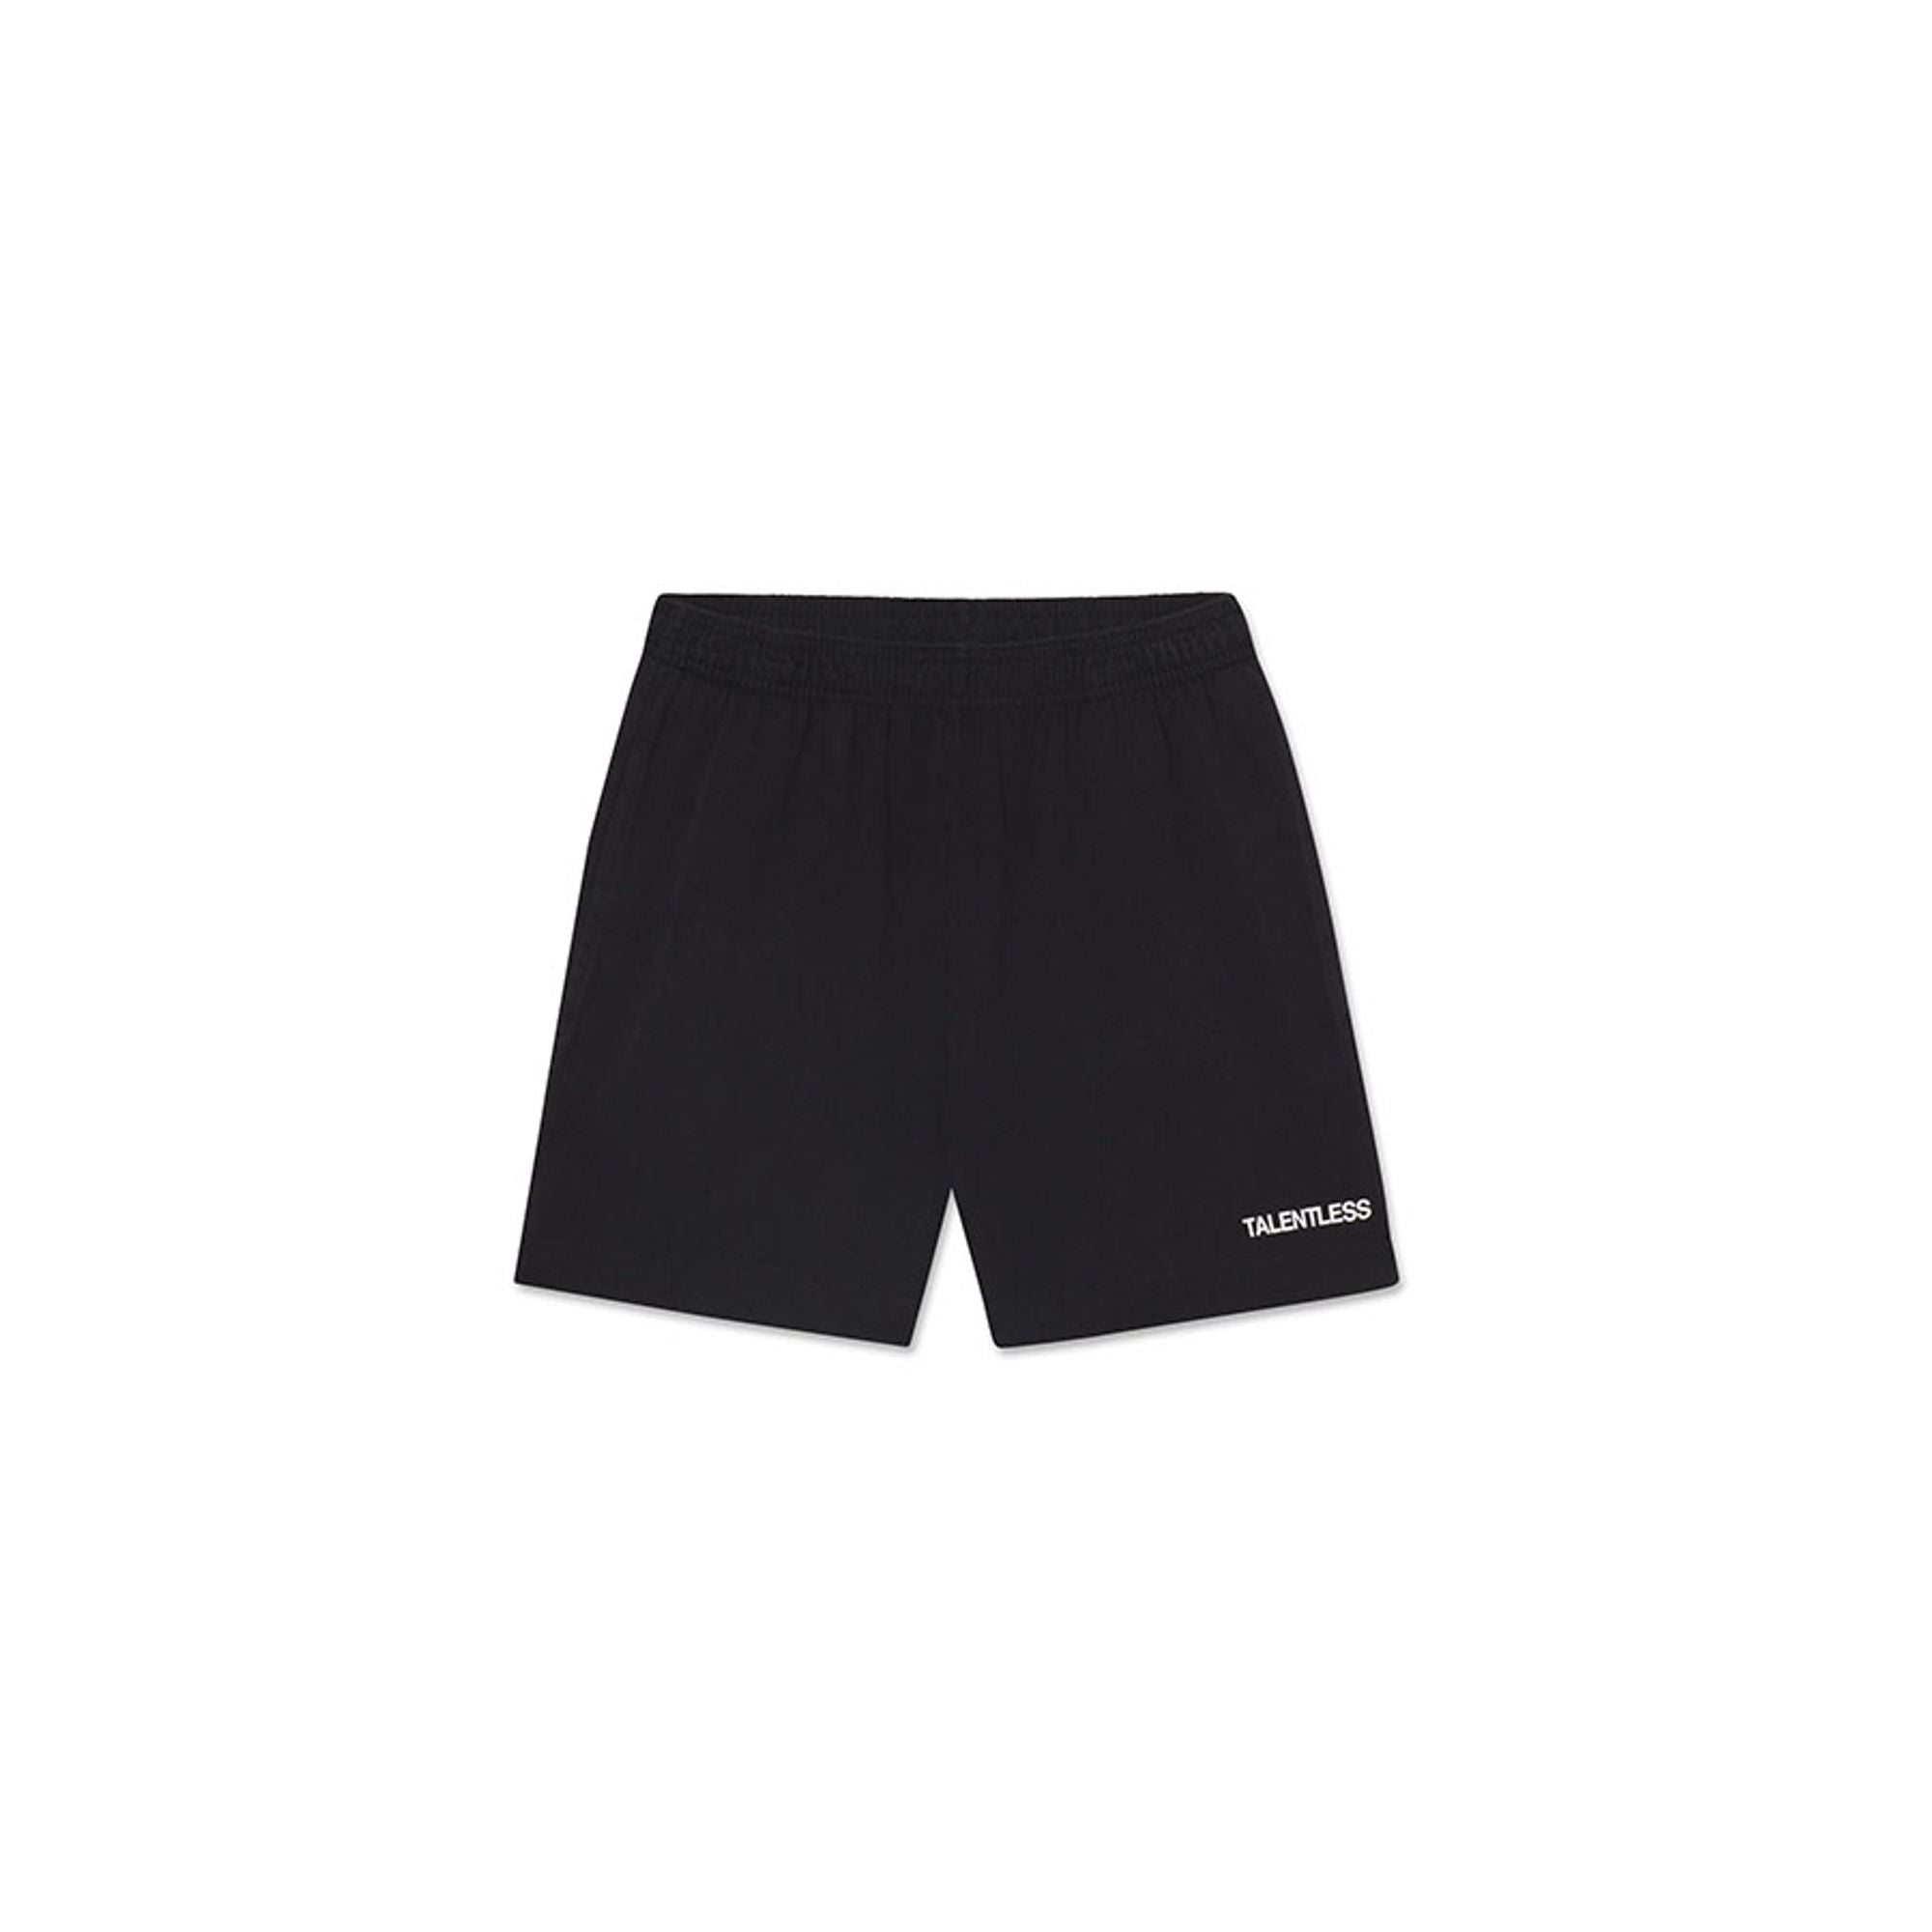 Pangaia x Just Collection Sweat Shorts Review